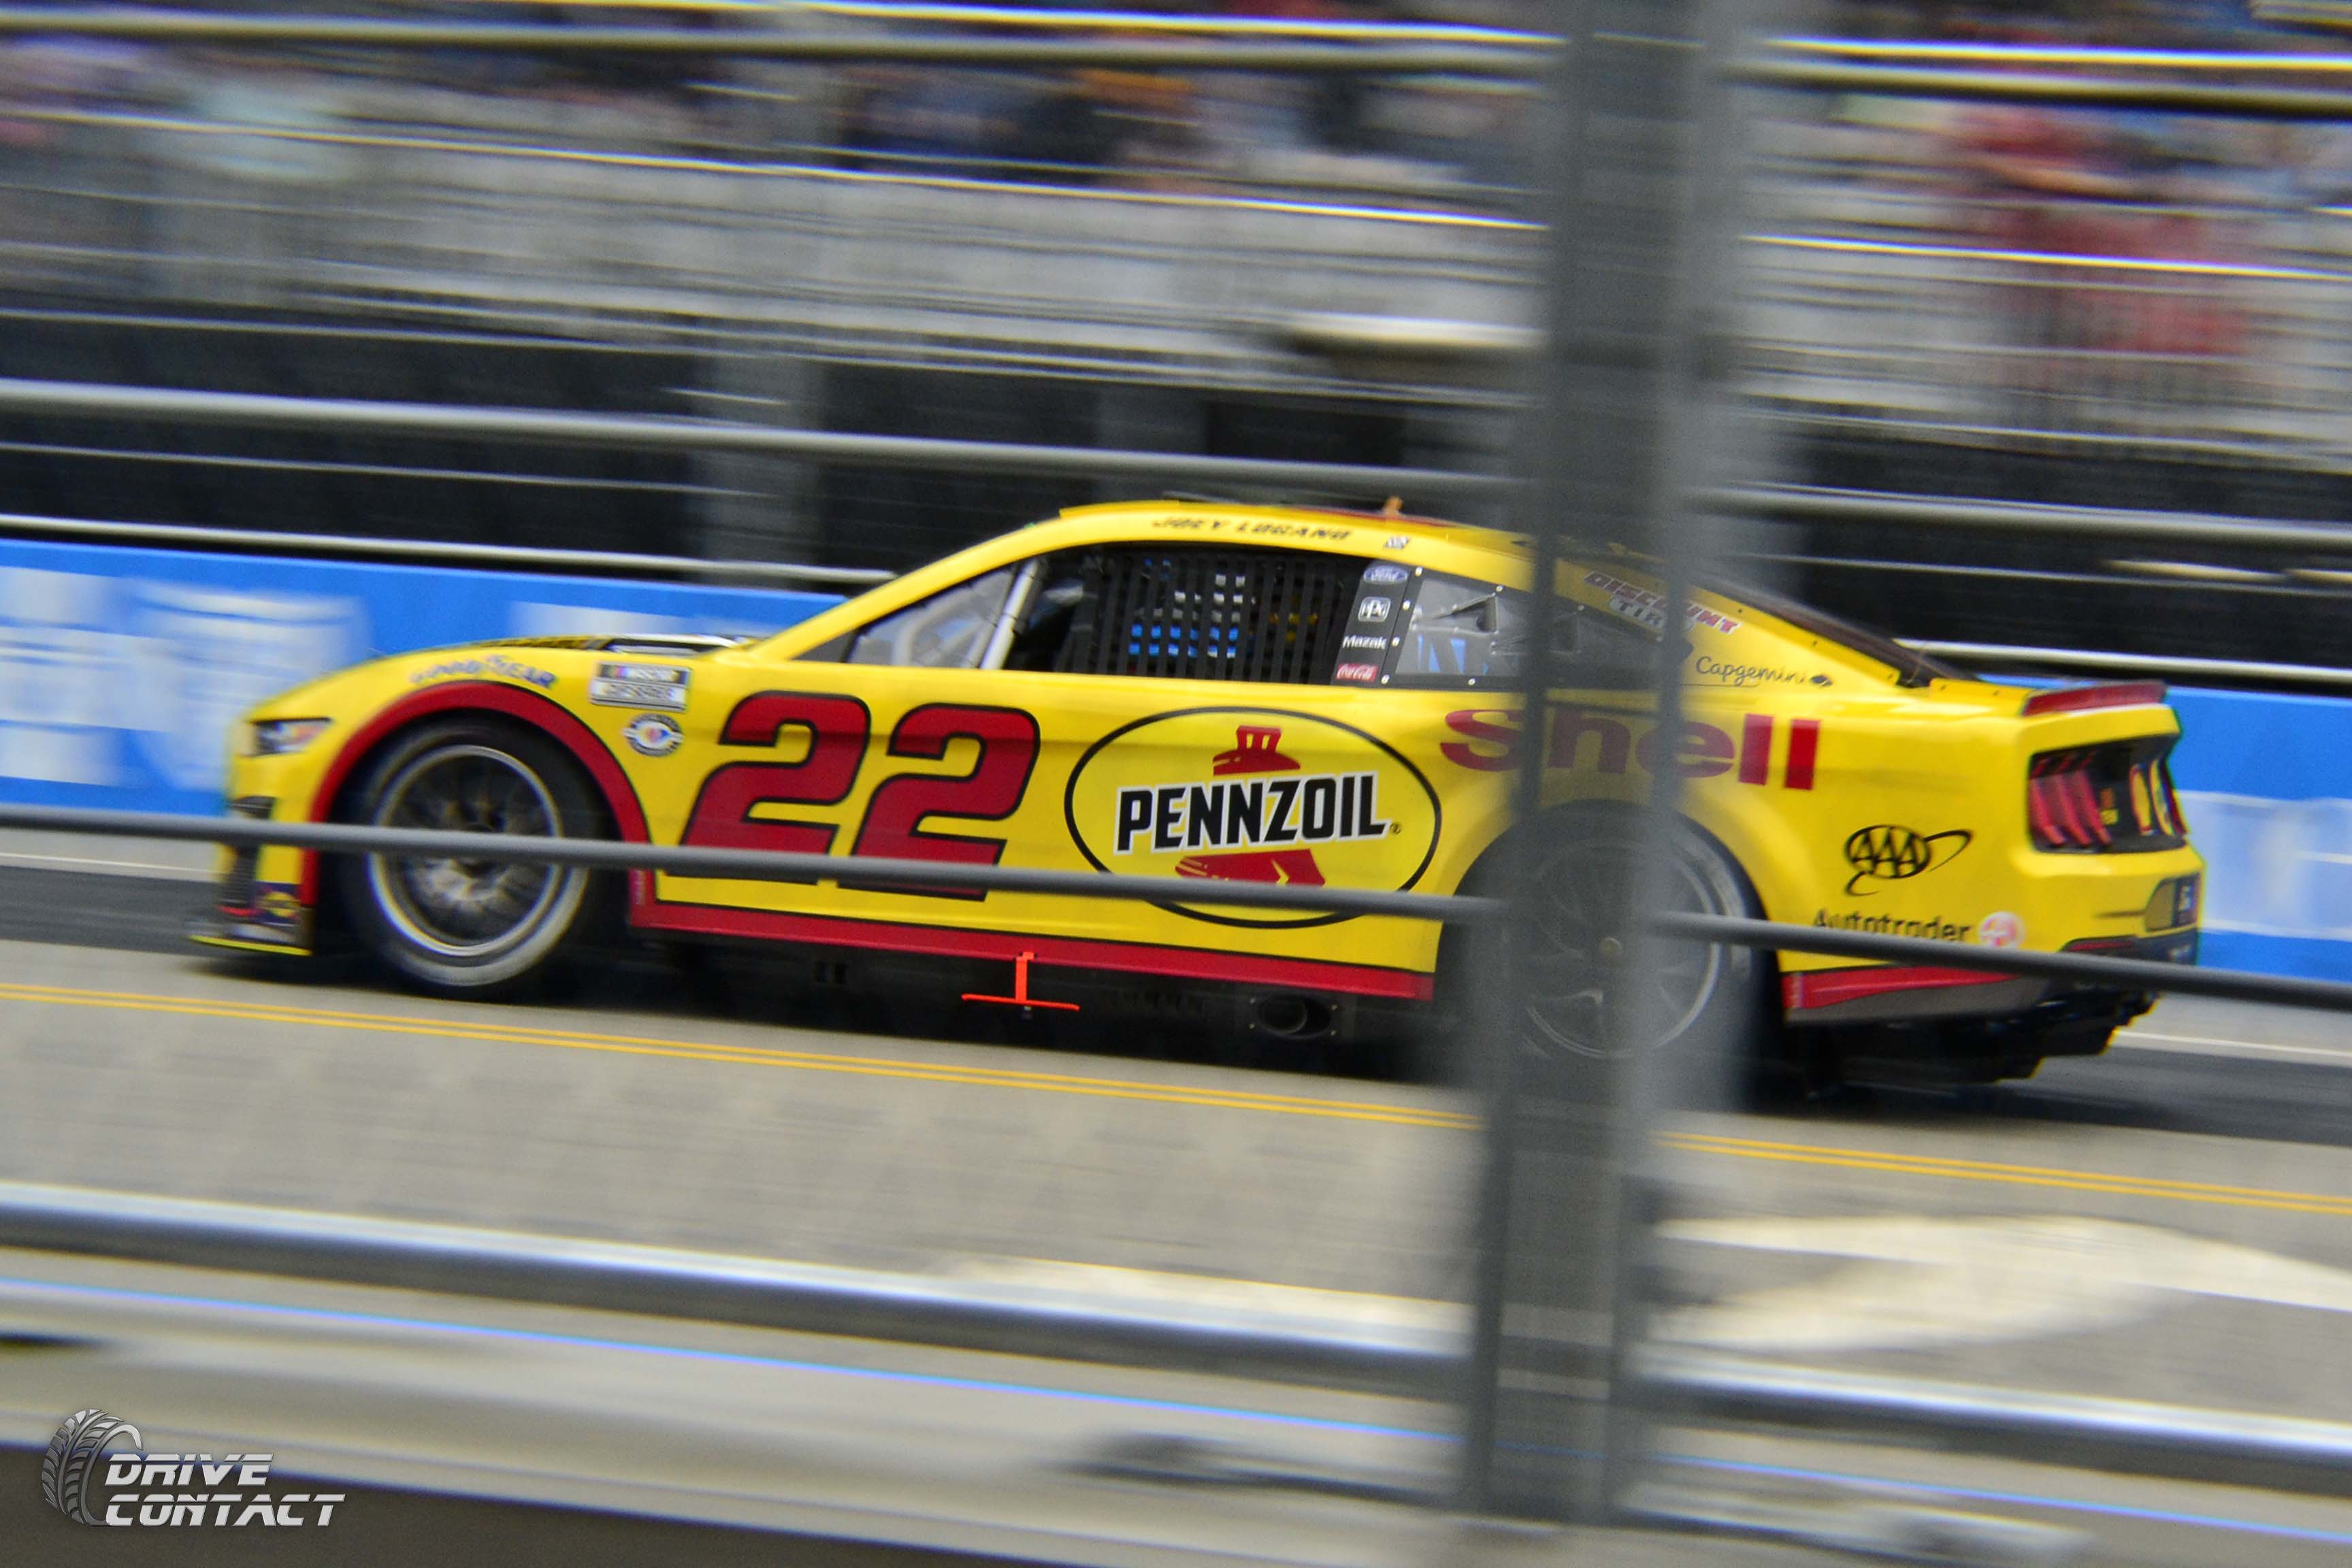 Joey Logano will drive the No. 22 Shell Pennzoil Ford